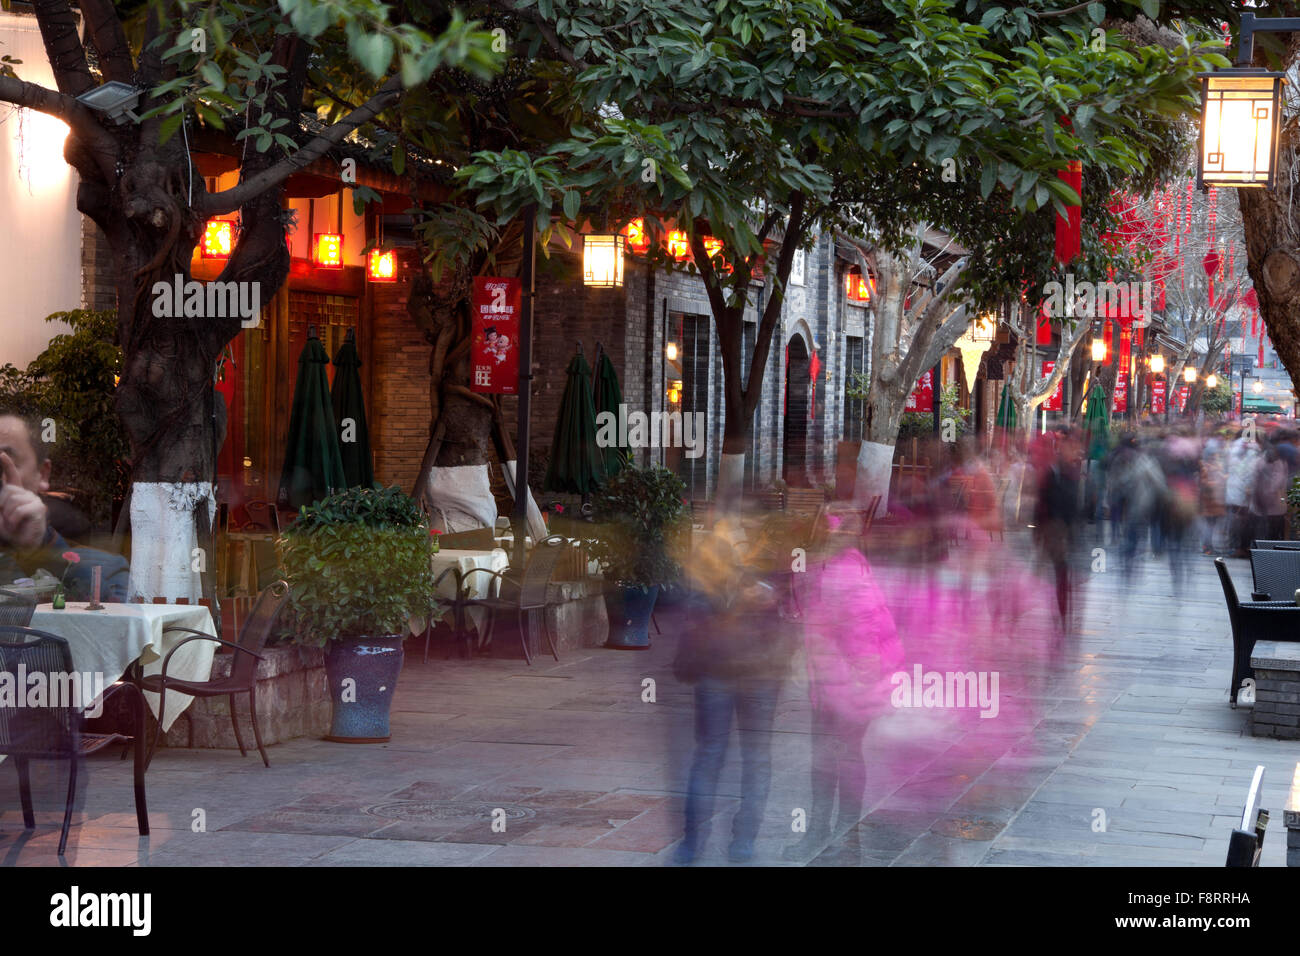 Kuan alley or road is the main road running through the restored and touristy old quarter of Kuan Zhai in Chengdu. Stock Photo